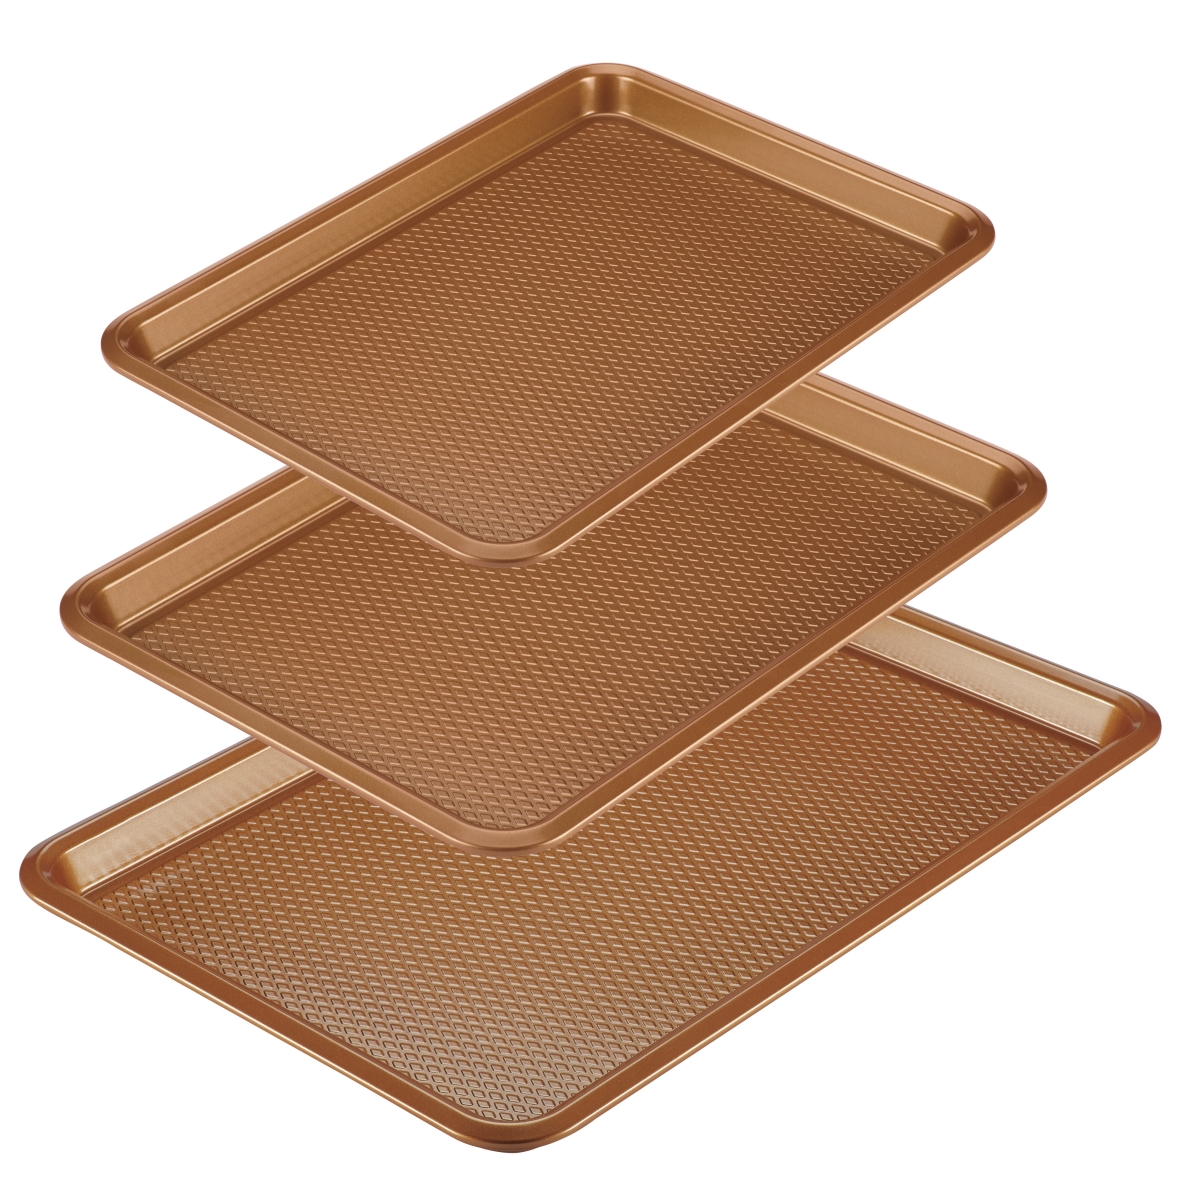 Picture of Ayesha Curry 47708 Bakeware Nonstick Cookie Pan Set - Copper, 3 Piece